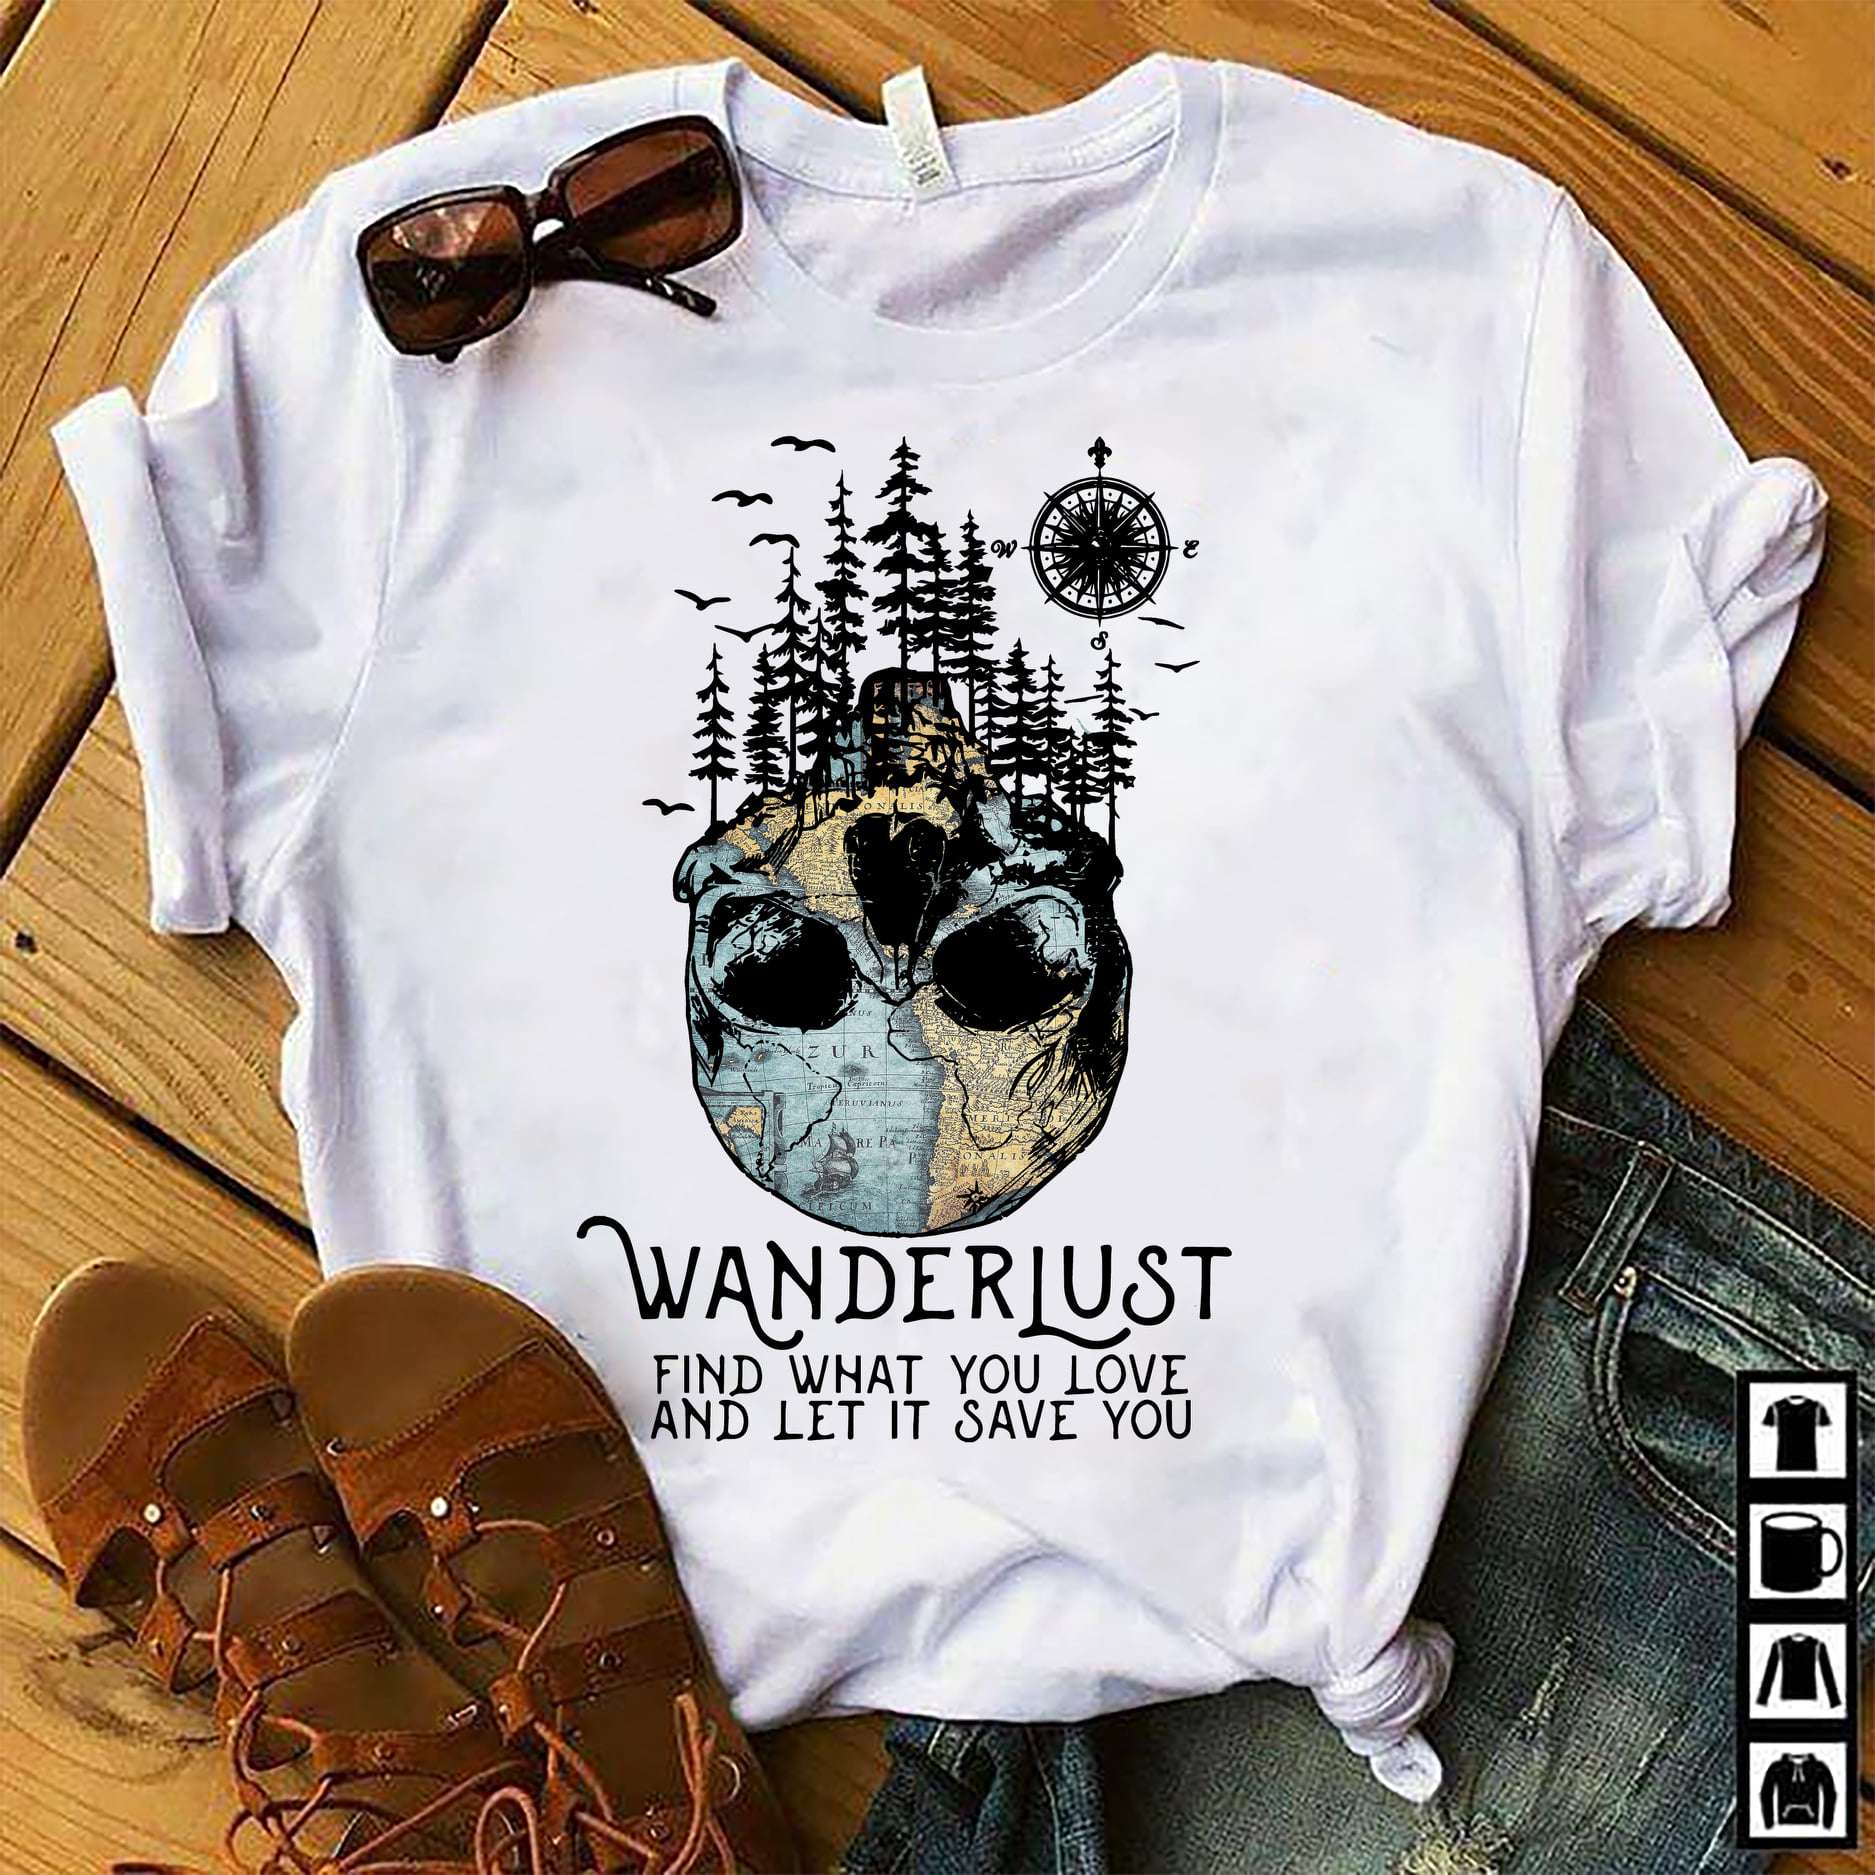 Wanderlust find what you love and let it save you - Wander people, love traveling lifestyle